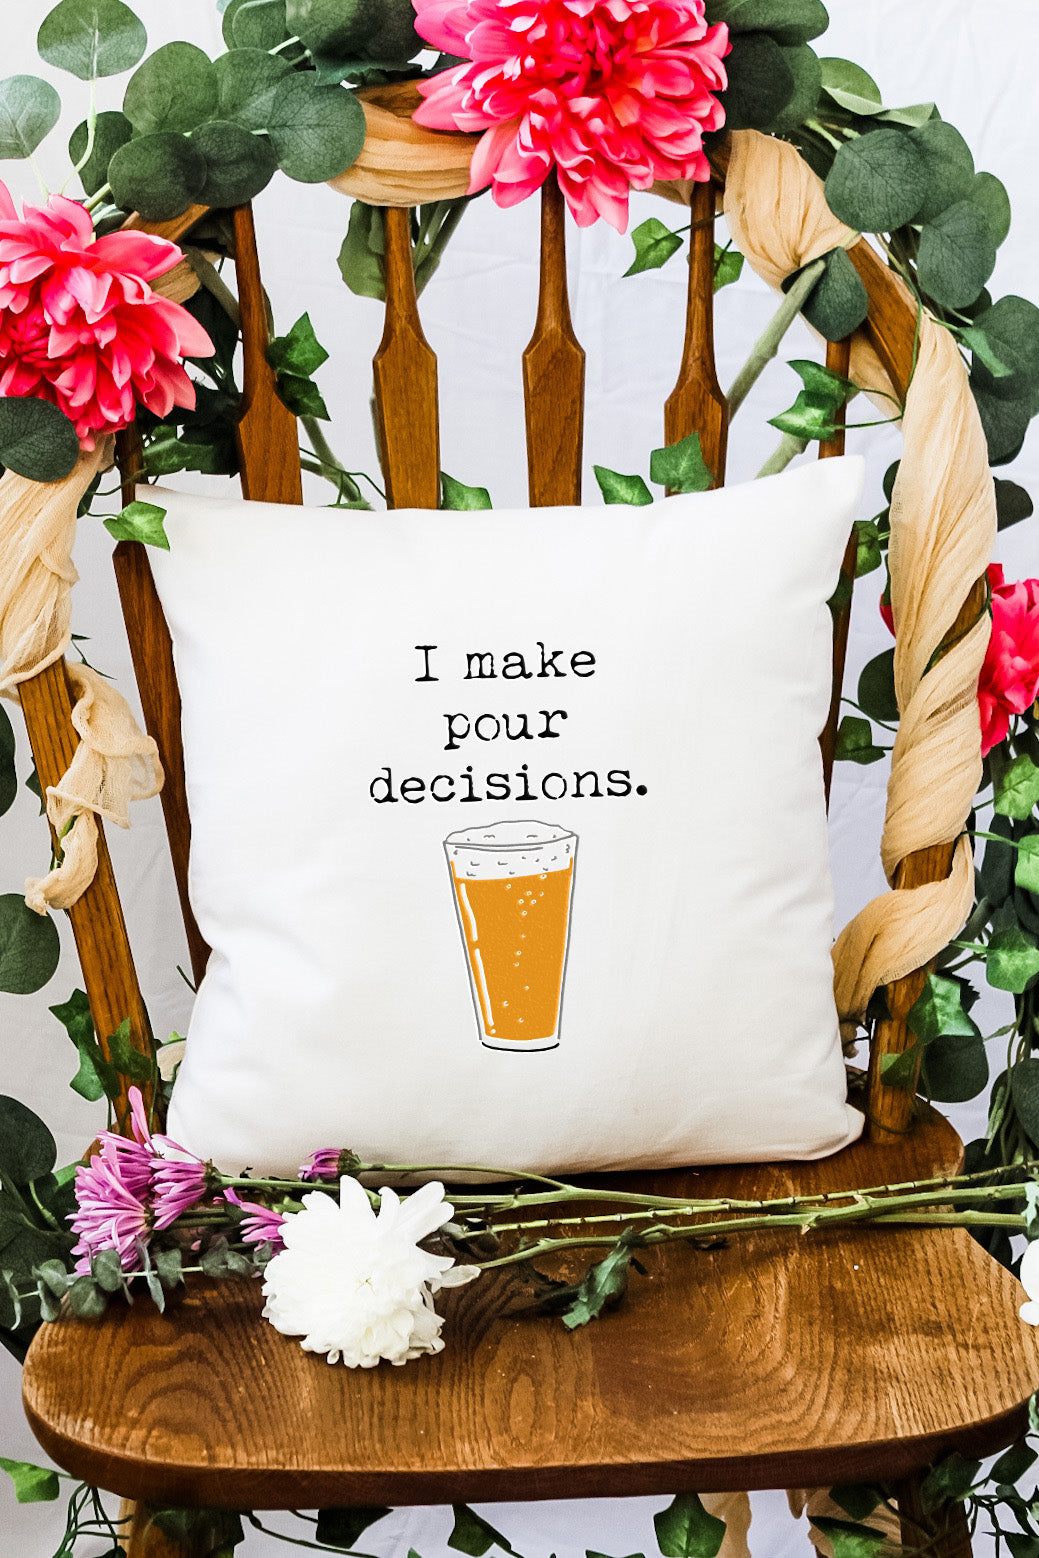 I Make Pour Decisions (Craft Beer) - Decorative Throw Pillow - MoonlightMakers